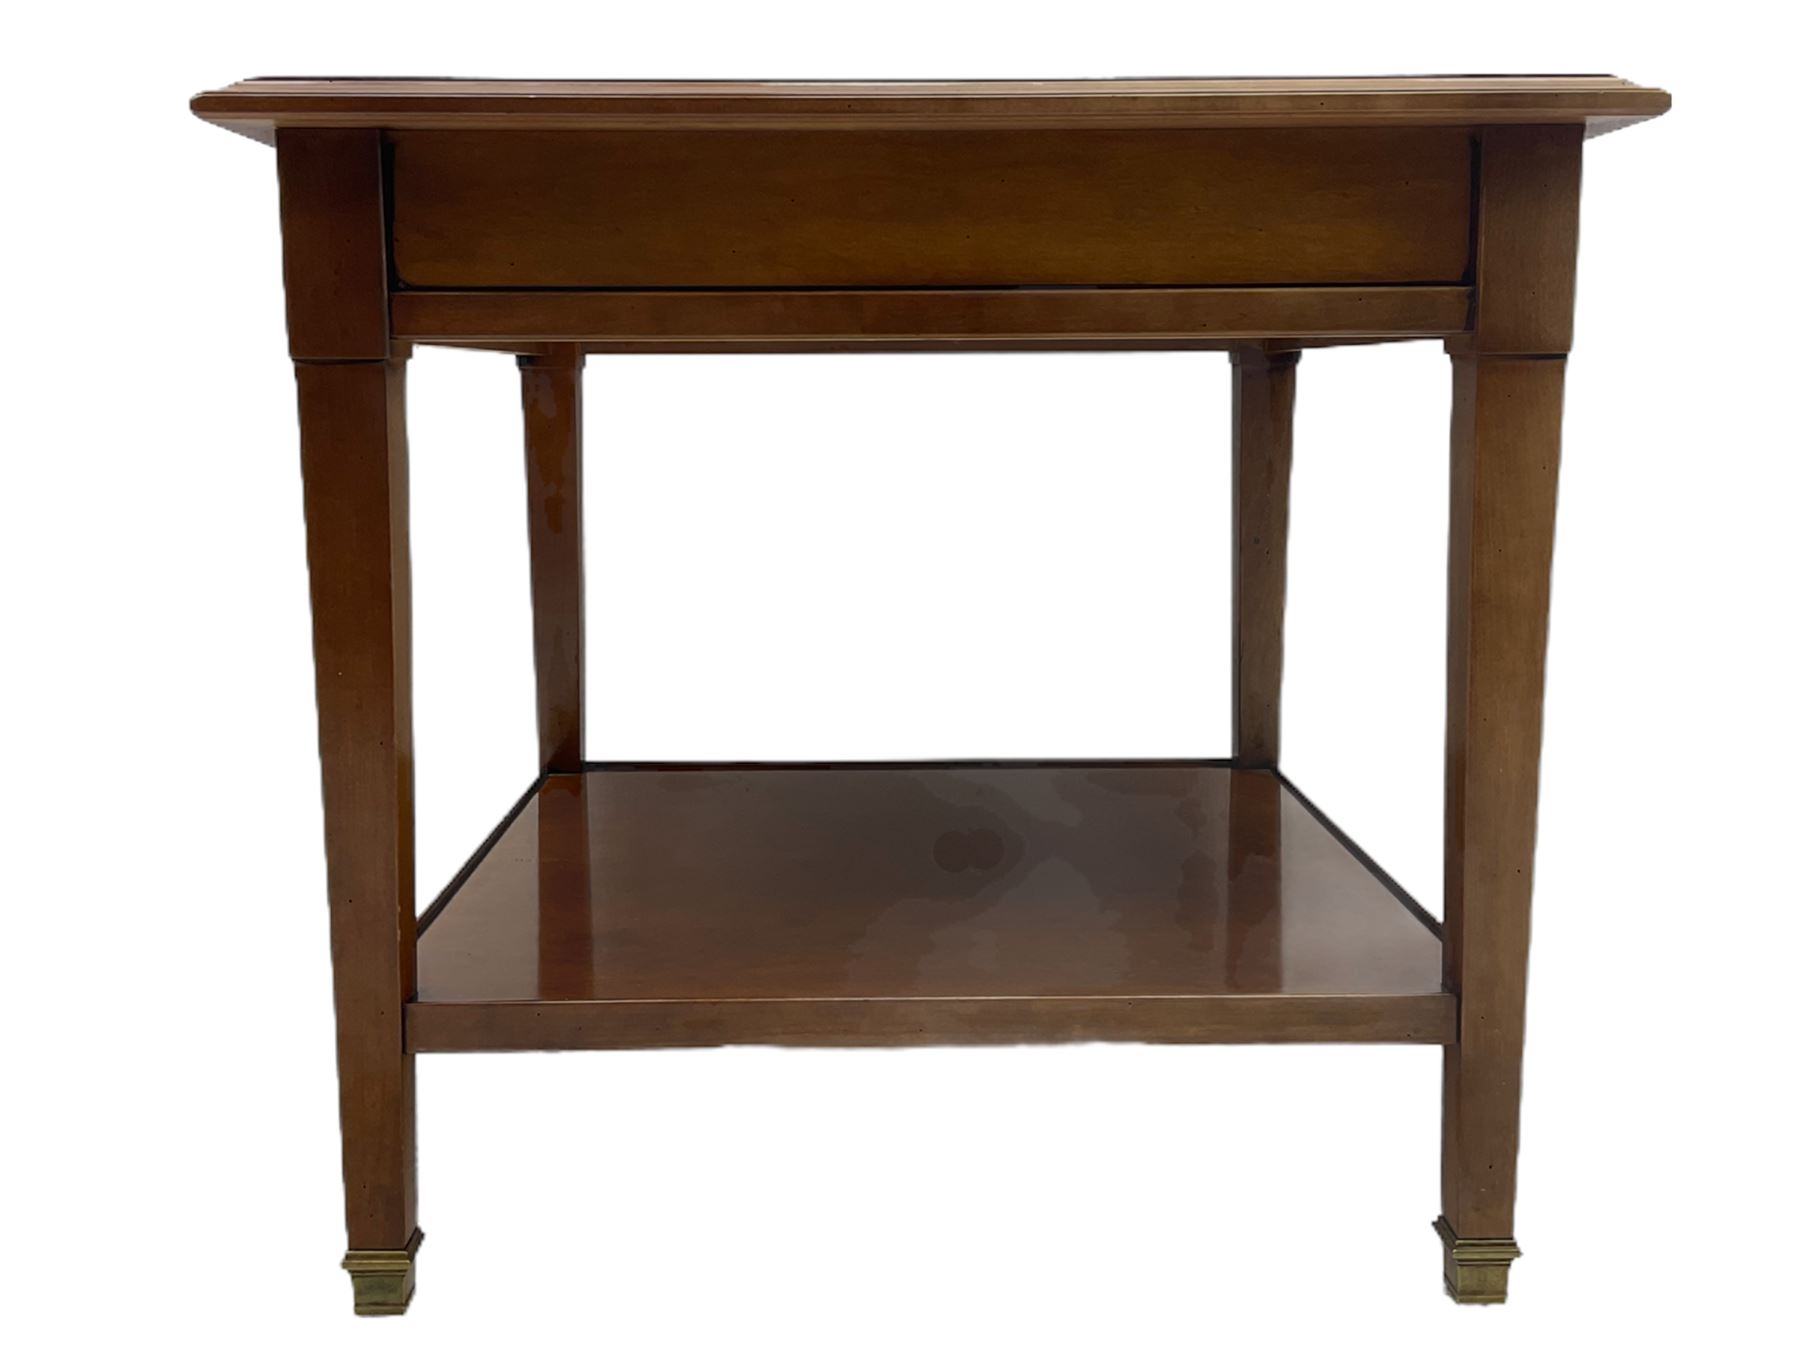 Grange Furniture cherry wood square lamp table - Image 5 of 5